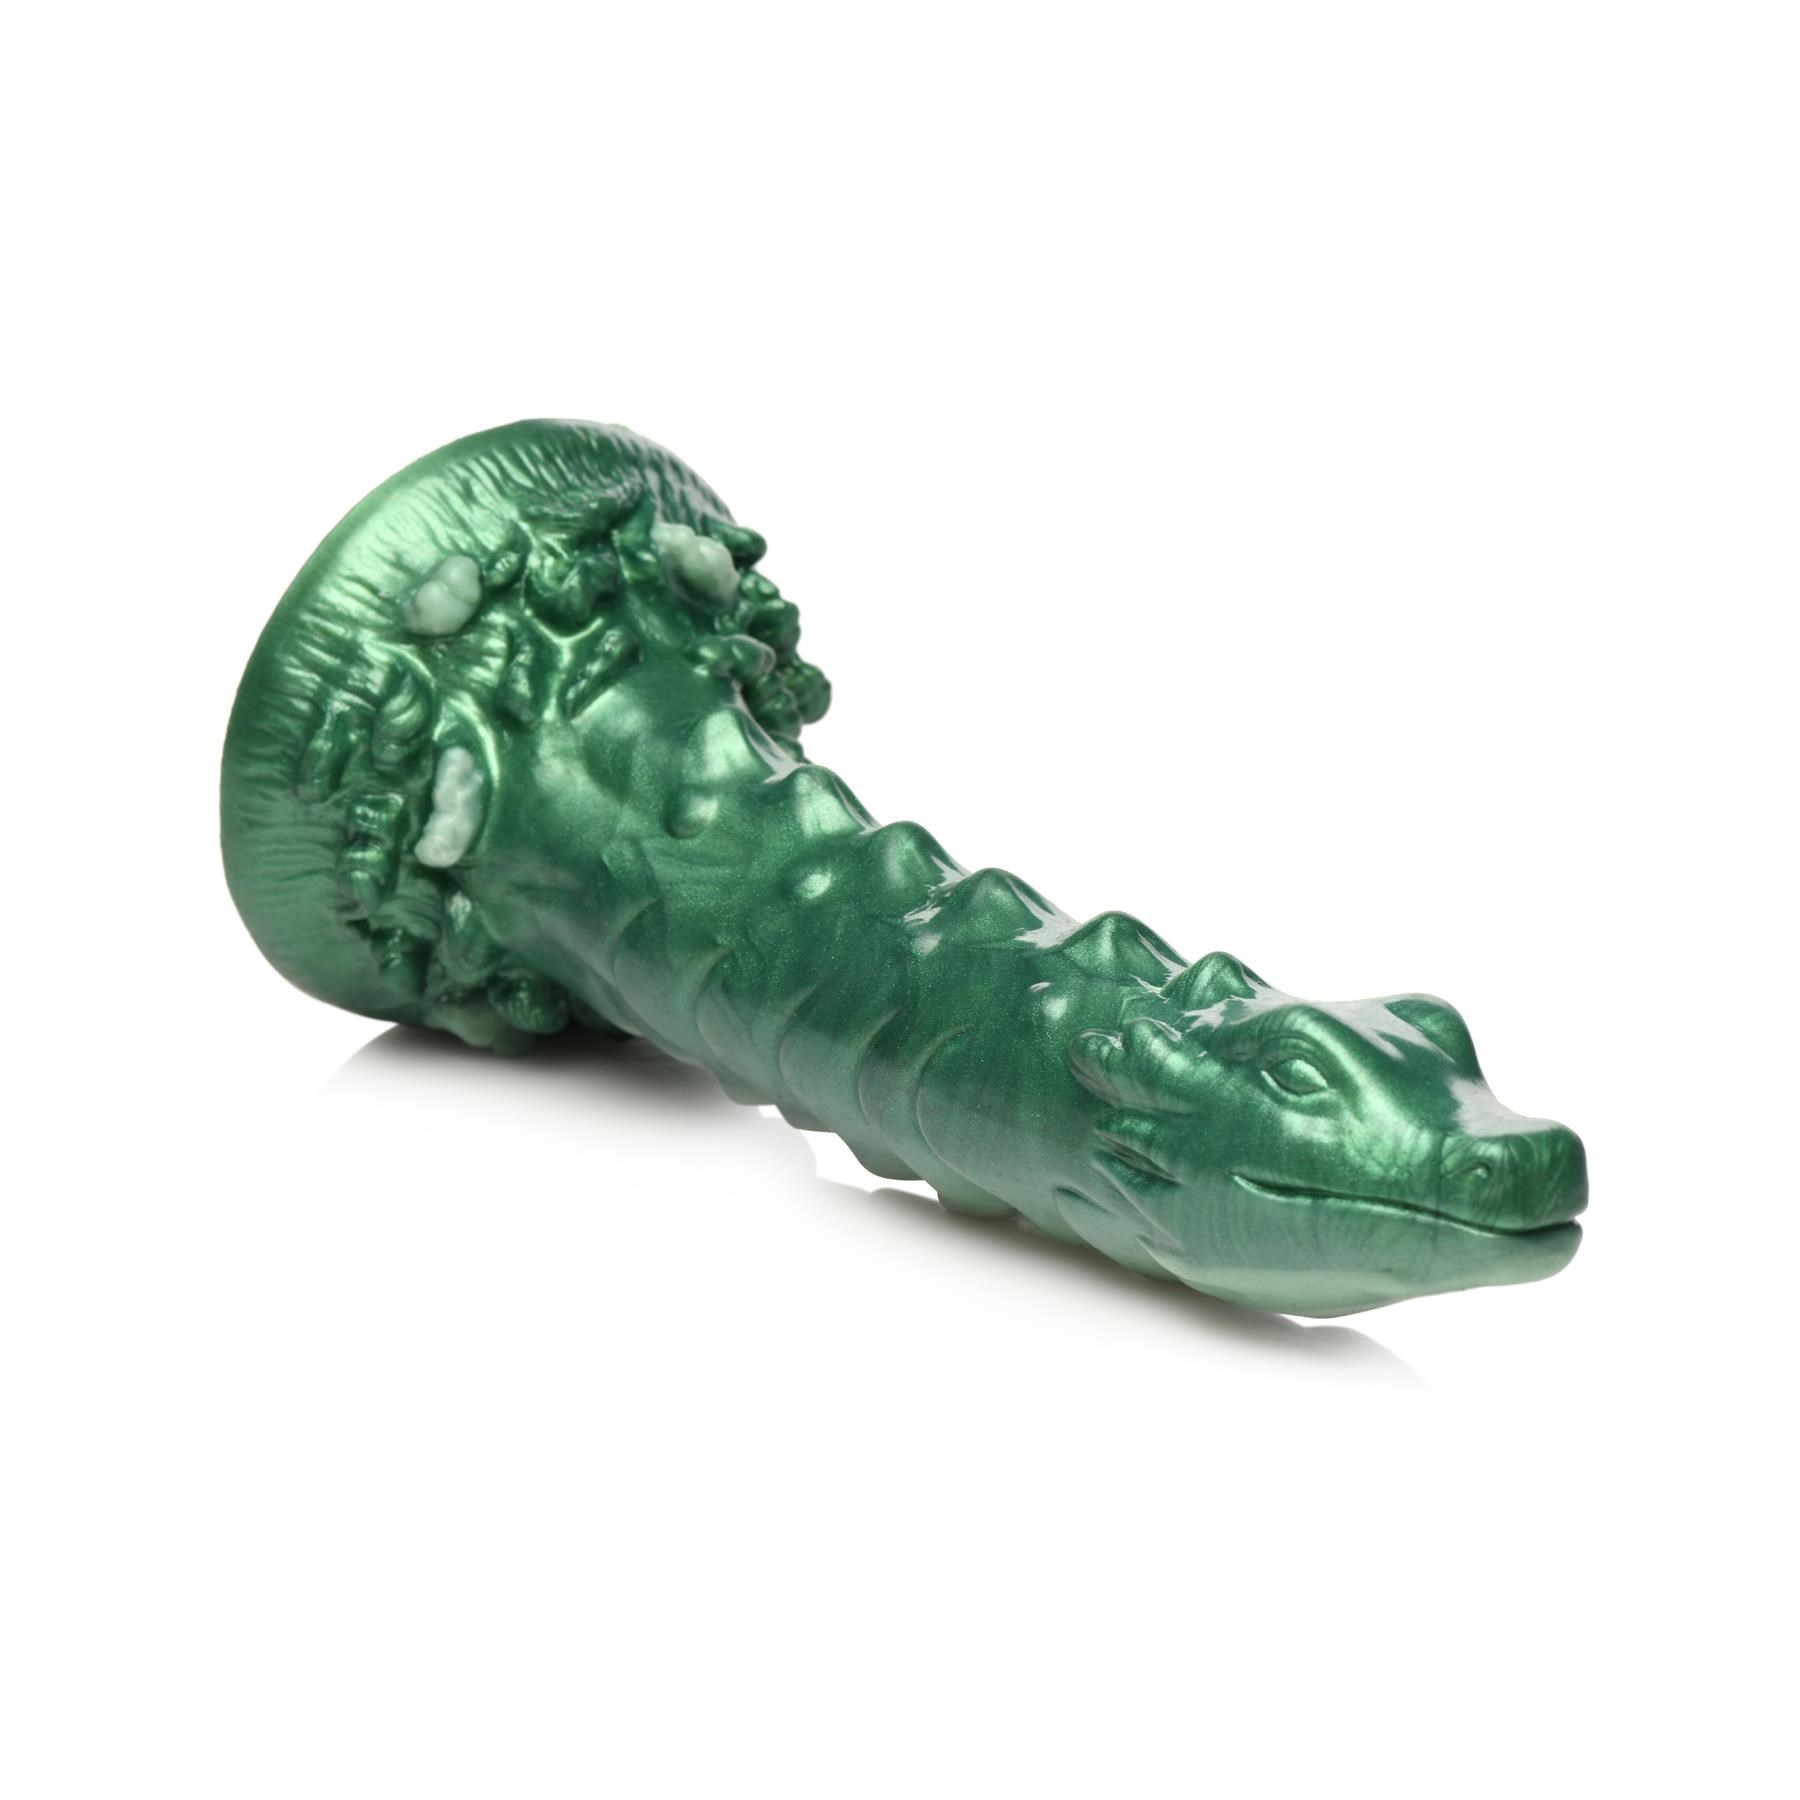 CreatureCocks Cockness Monster Silicone Dildo - Product Shot #5